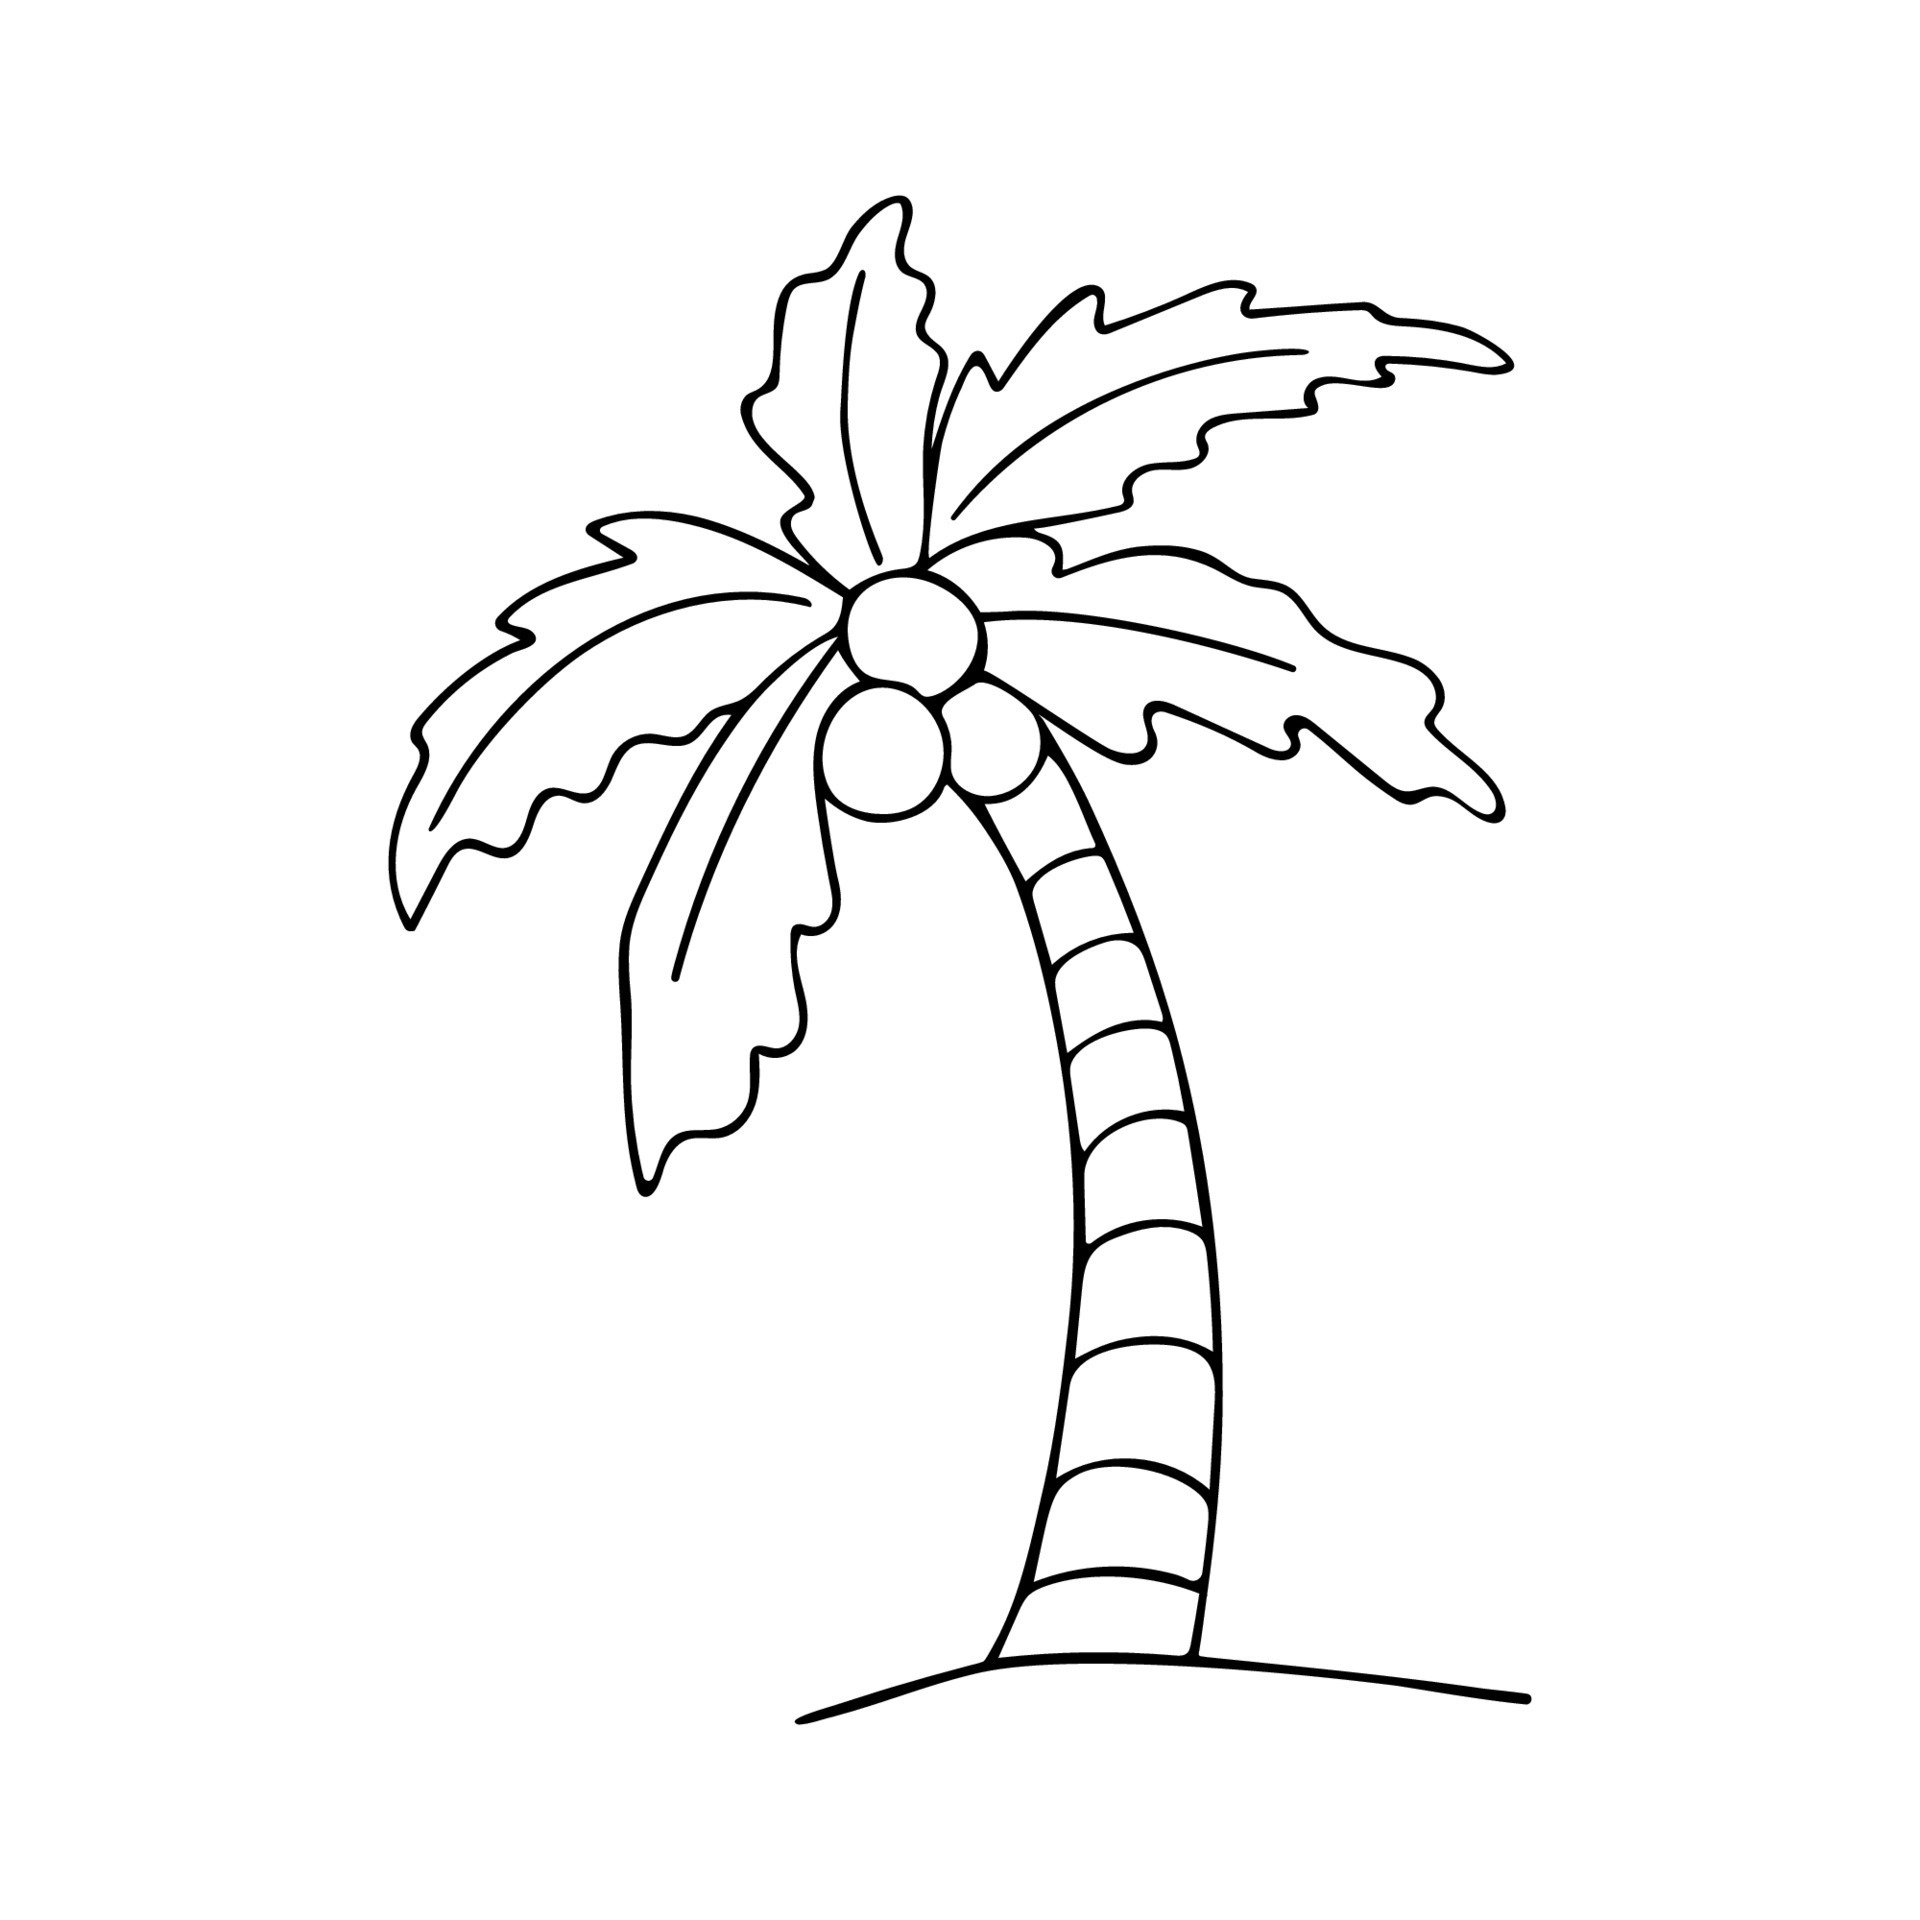 Doodle of palm tree isolated on white background. Hand drawn vector ...